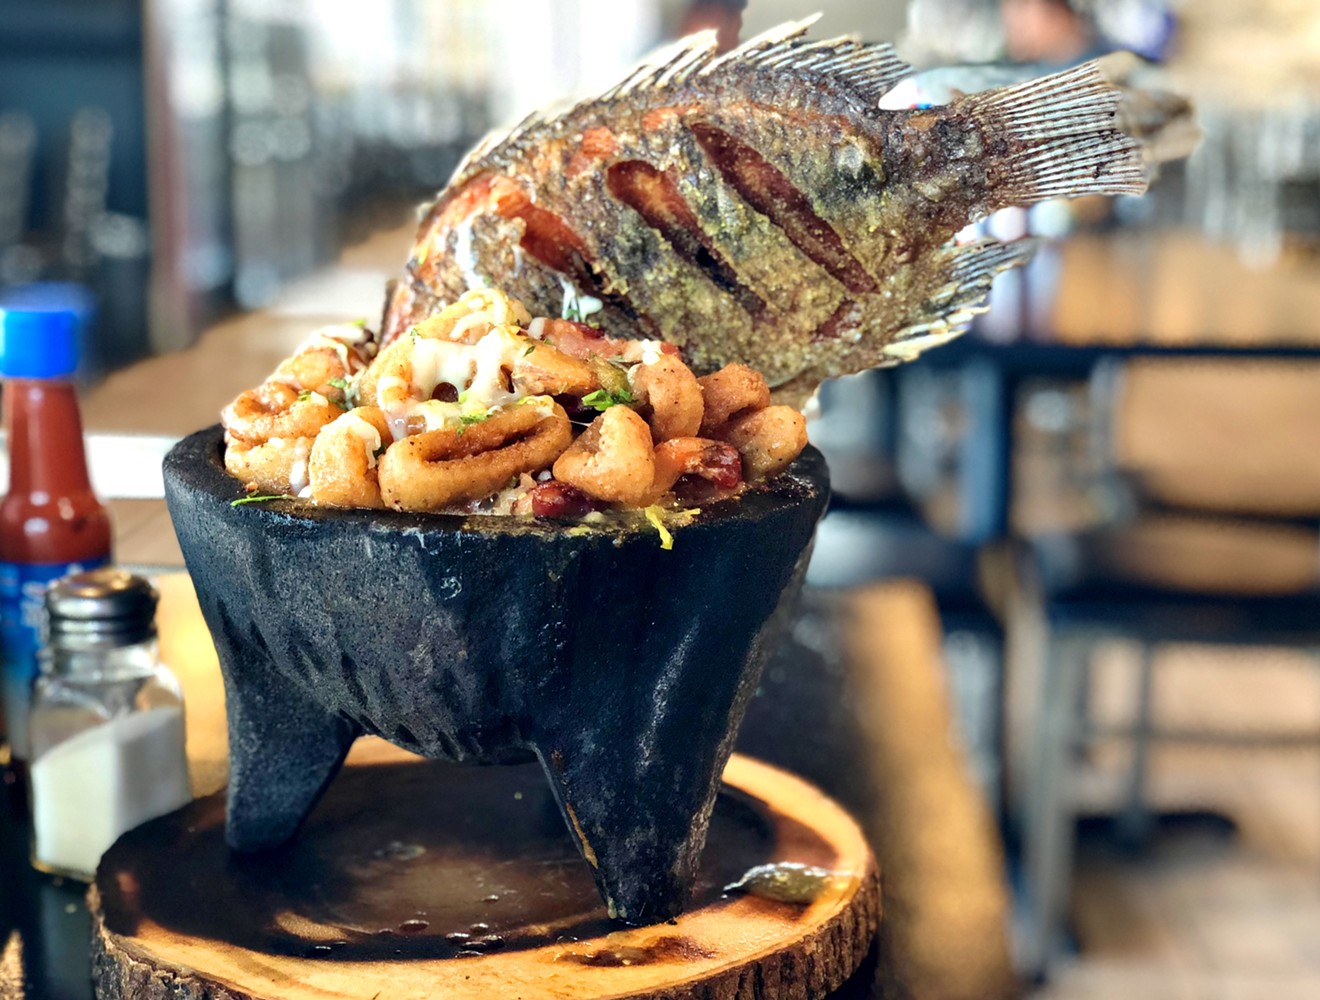 A whole mojarra plunges into a sizzling seafood molcajete.